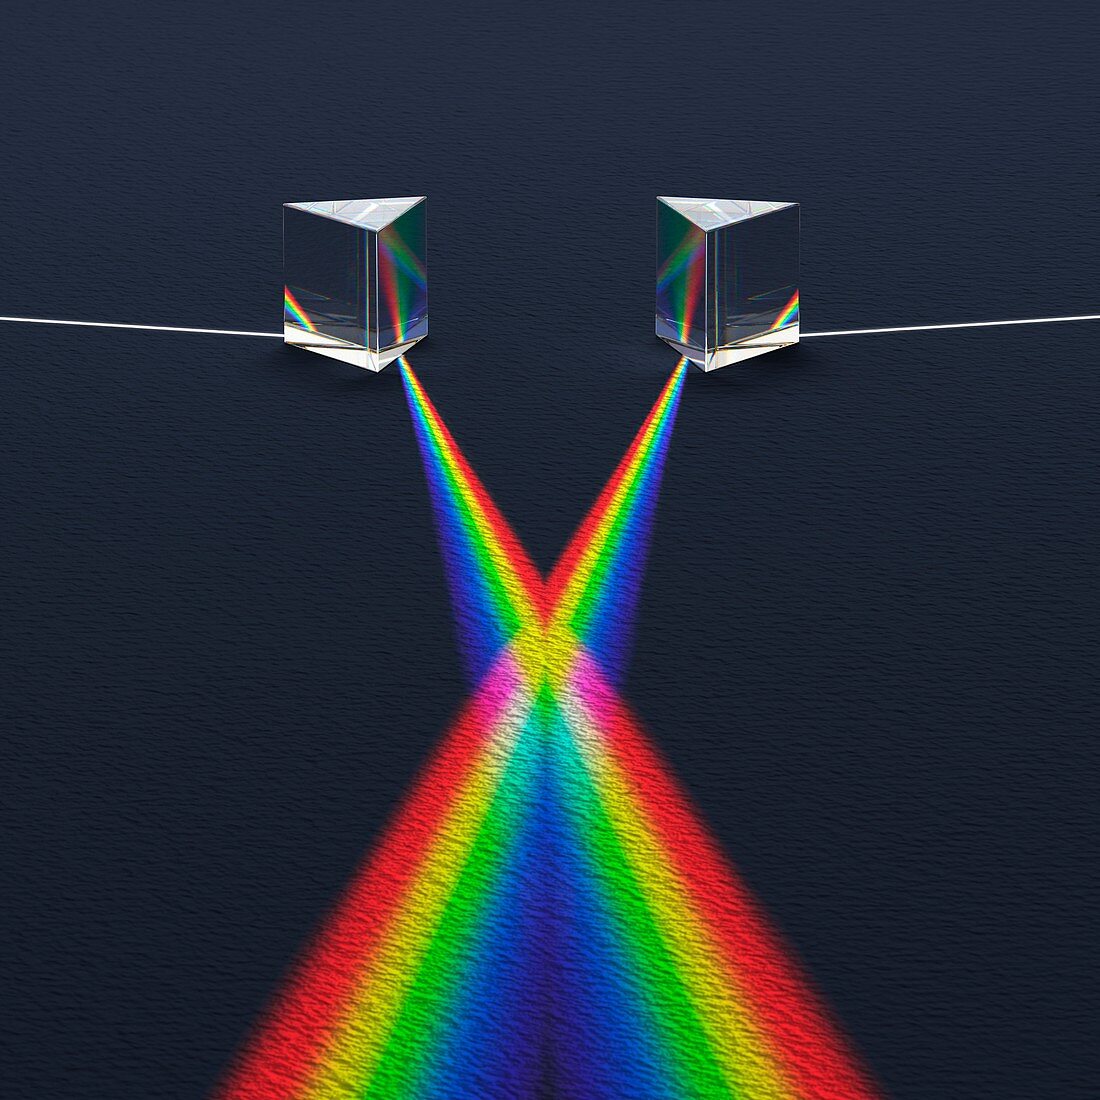 Crossed Prisms with Spectra